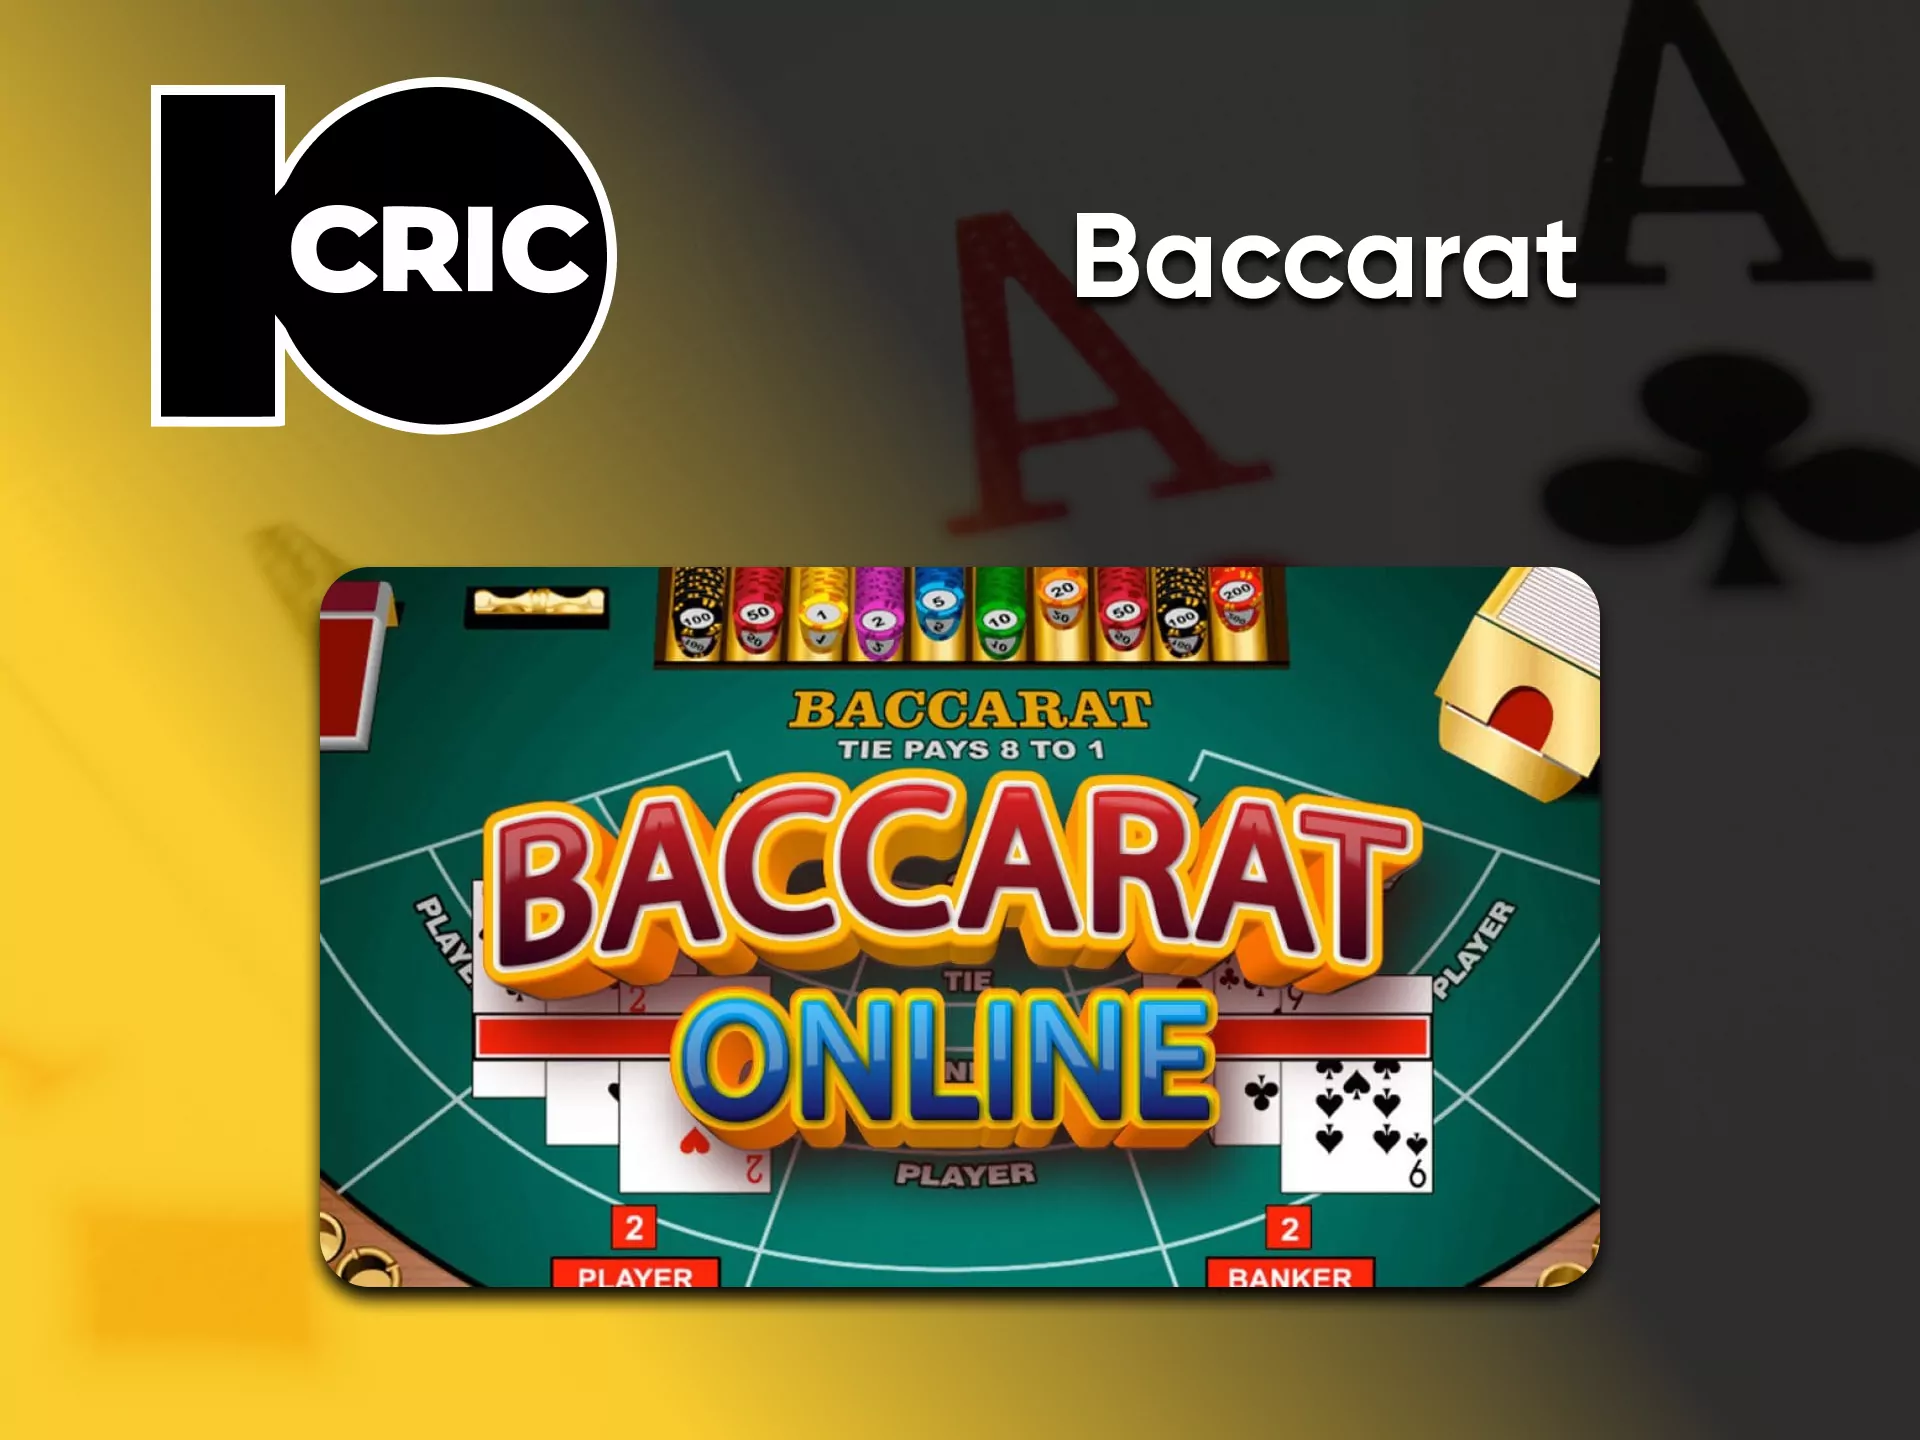 Visit the Casino section to play Baccarat from 10cric.